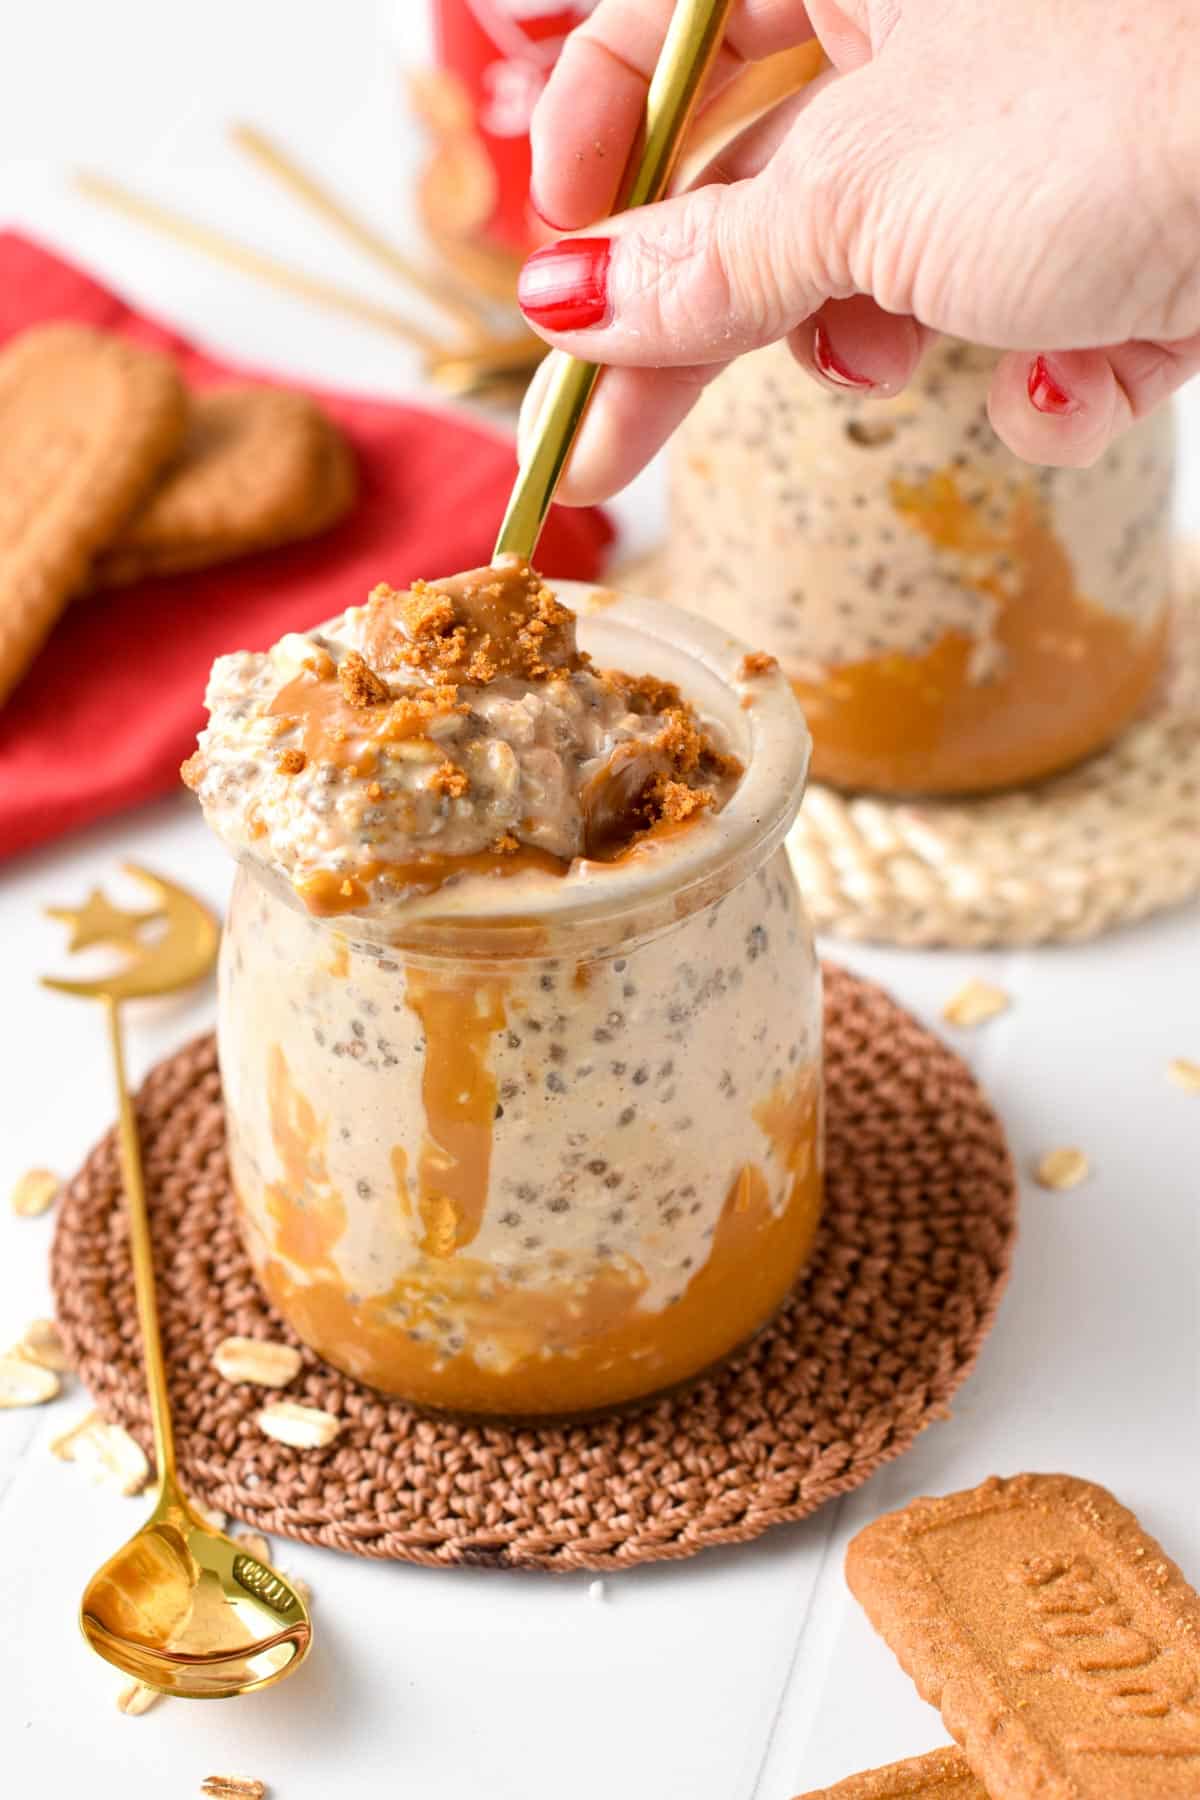 This Biscoff Overnight Oats recipe is the most deliciously creamy, cinnamon-flavored oats breakfast, If you love anything biscoff, from the spread to biscuits, this easy breakfast is for you.